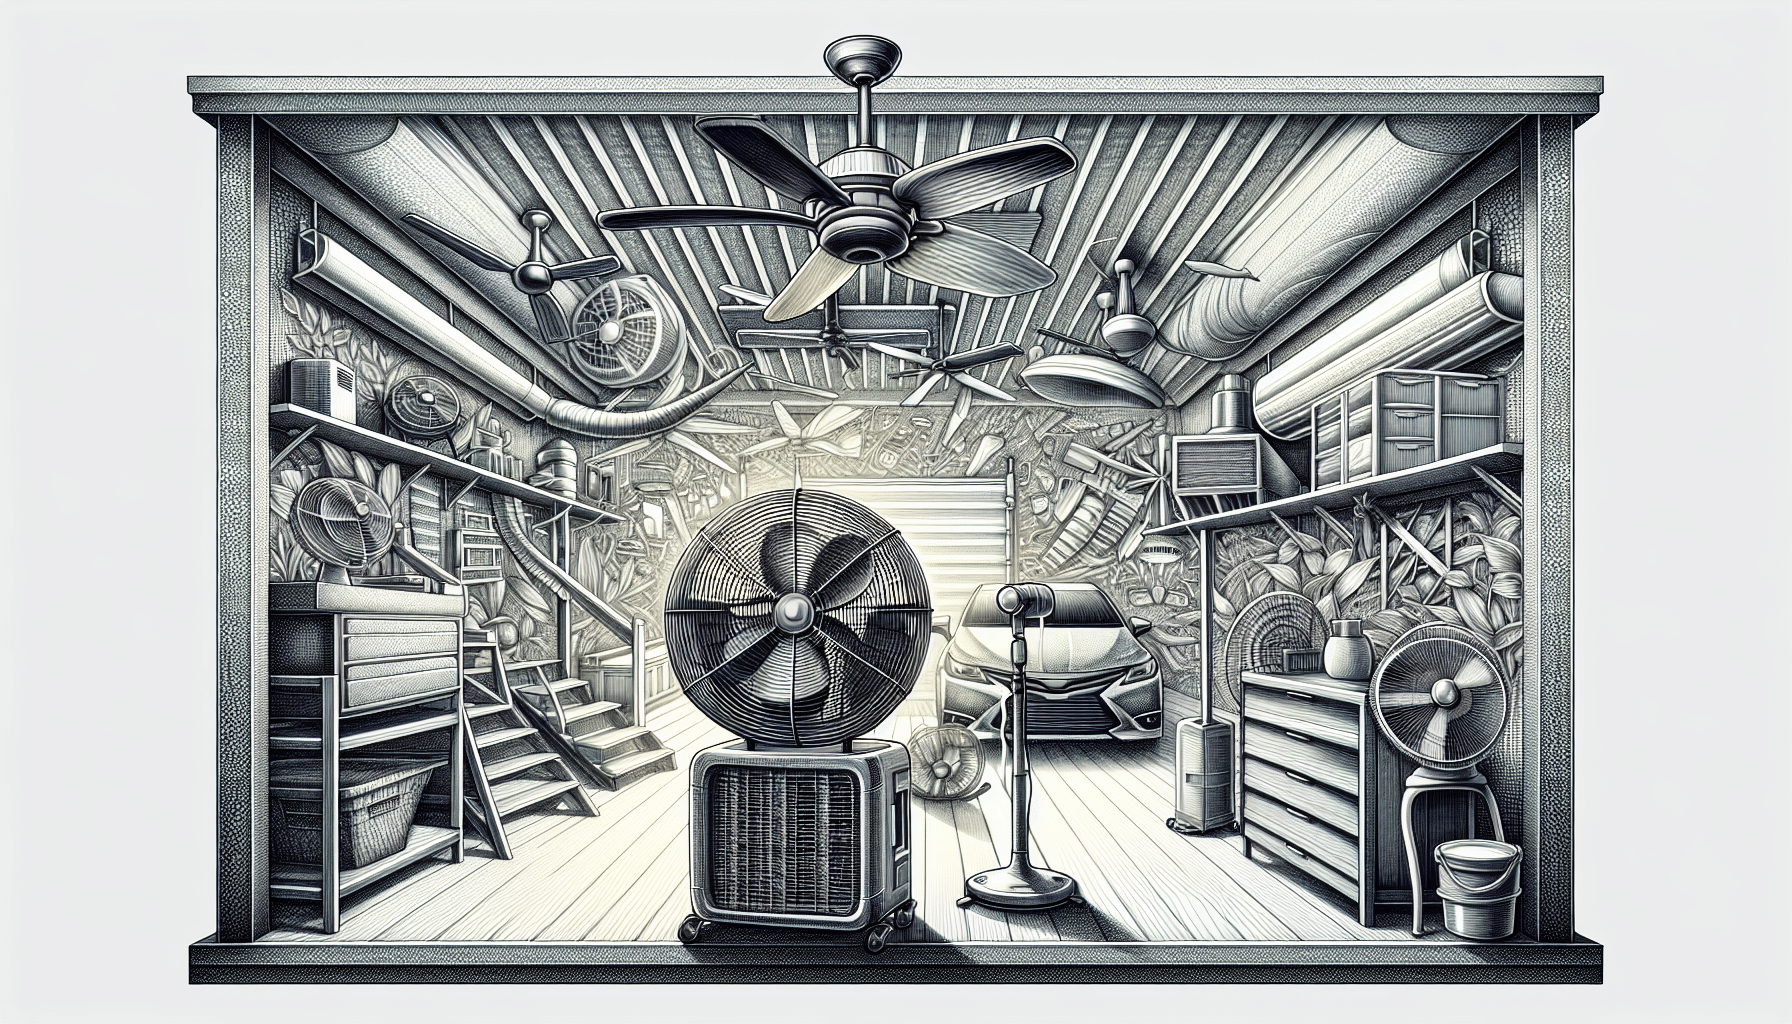 Illustration of fans circulating air in a garage